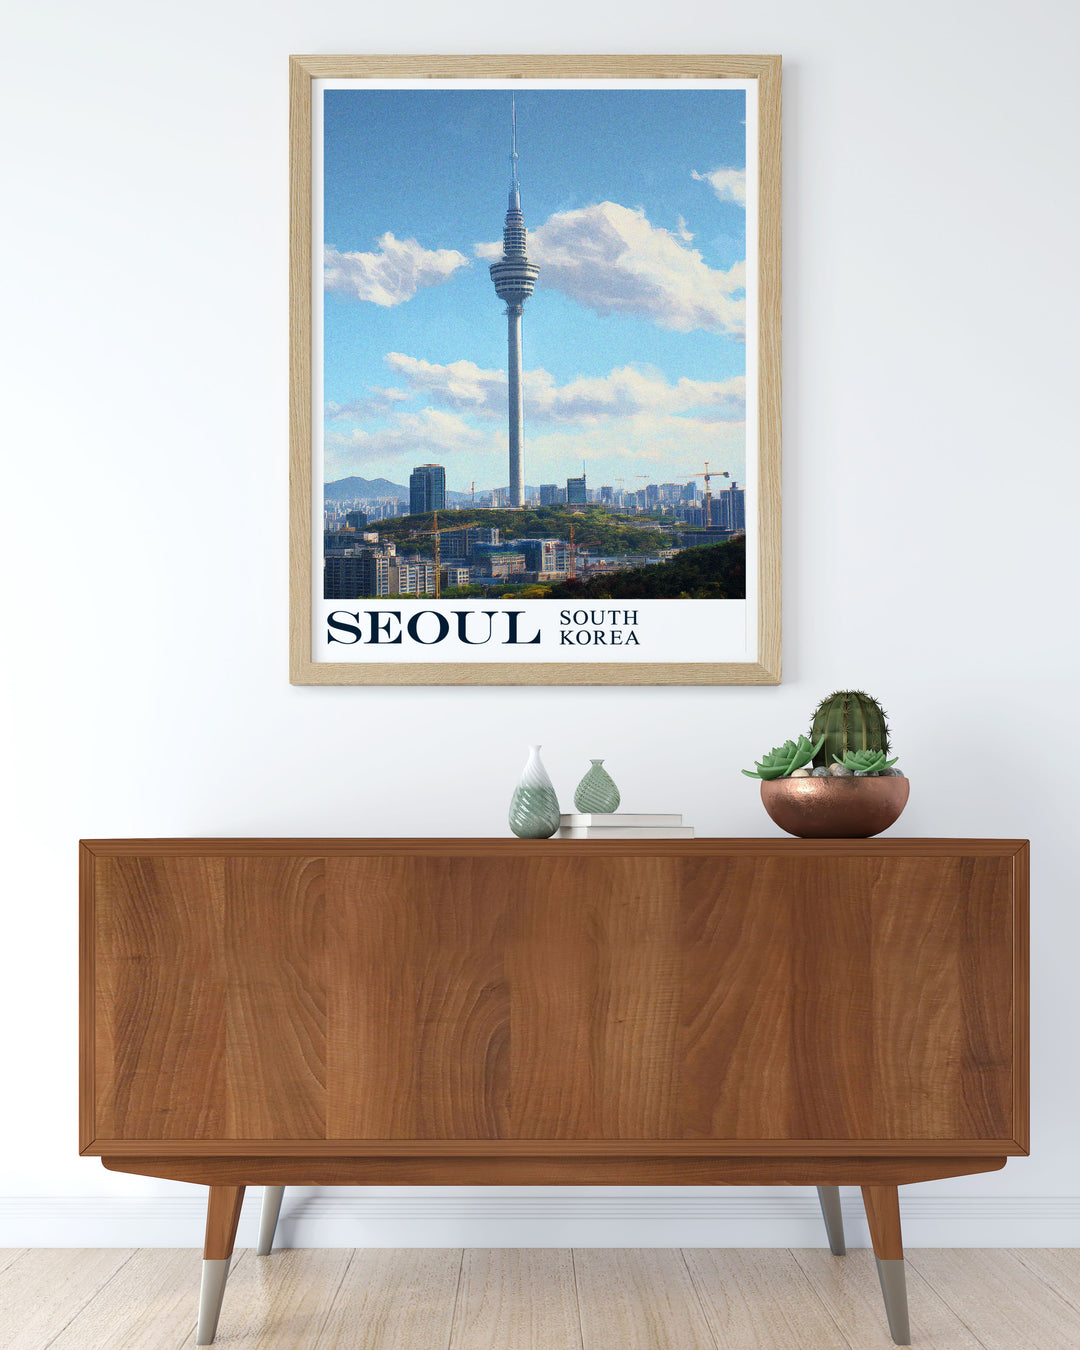 This vintage inspired poster of Seoul Tower captures the essence of the citys skyline, blending traditional and modern elements, perfect for those who appreciate the cultural richness and architectural beauty of Seoul.